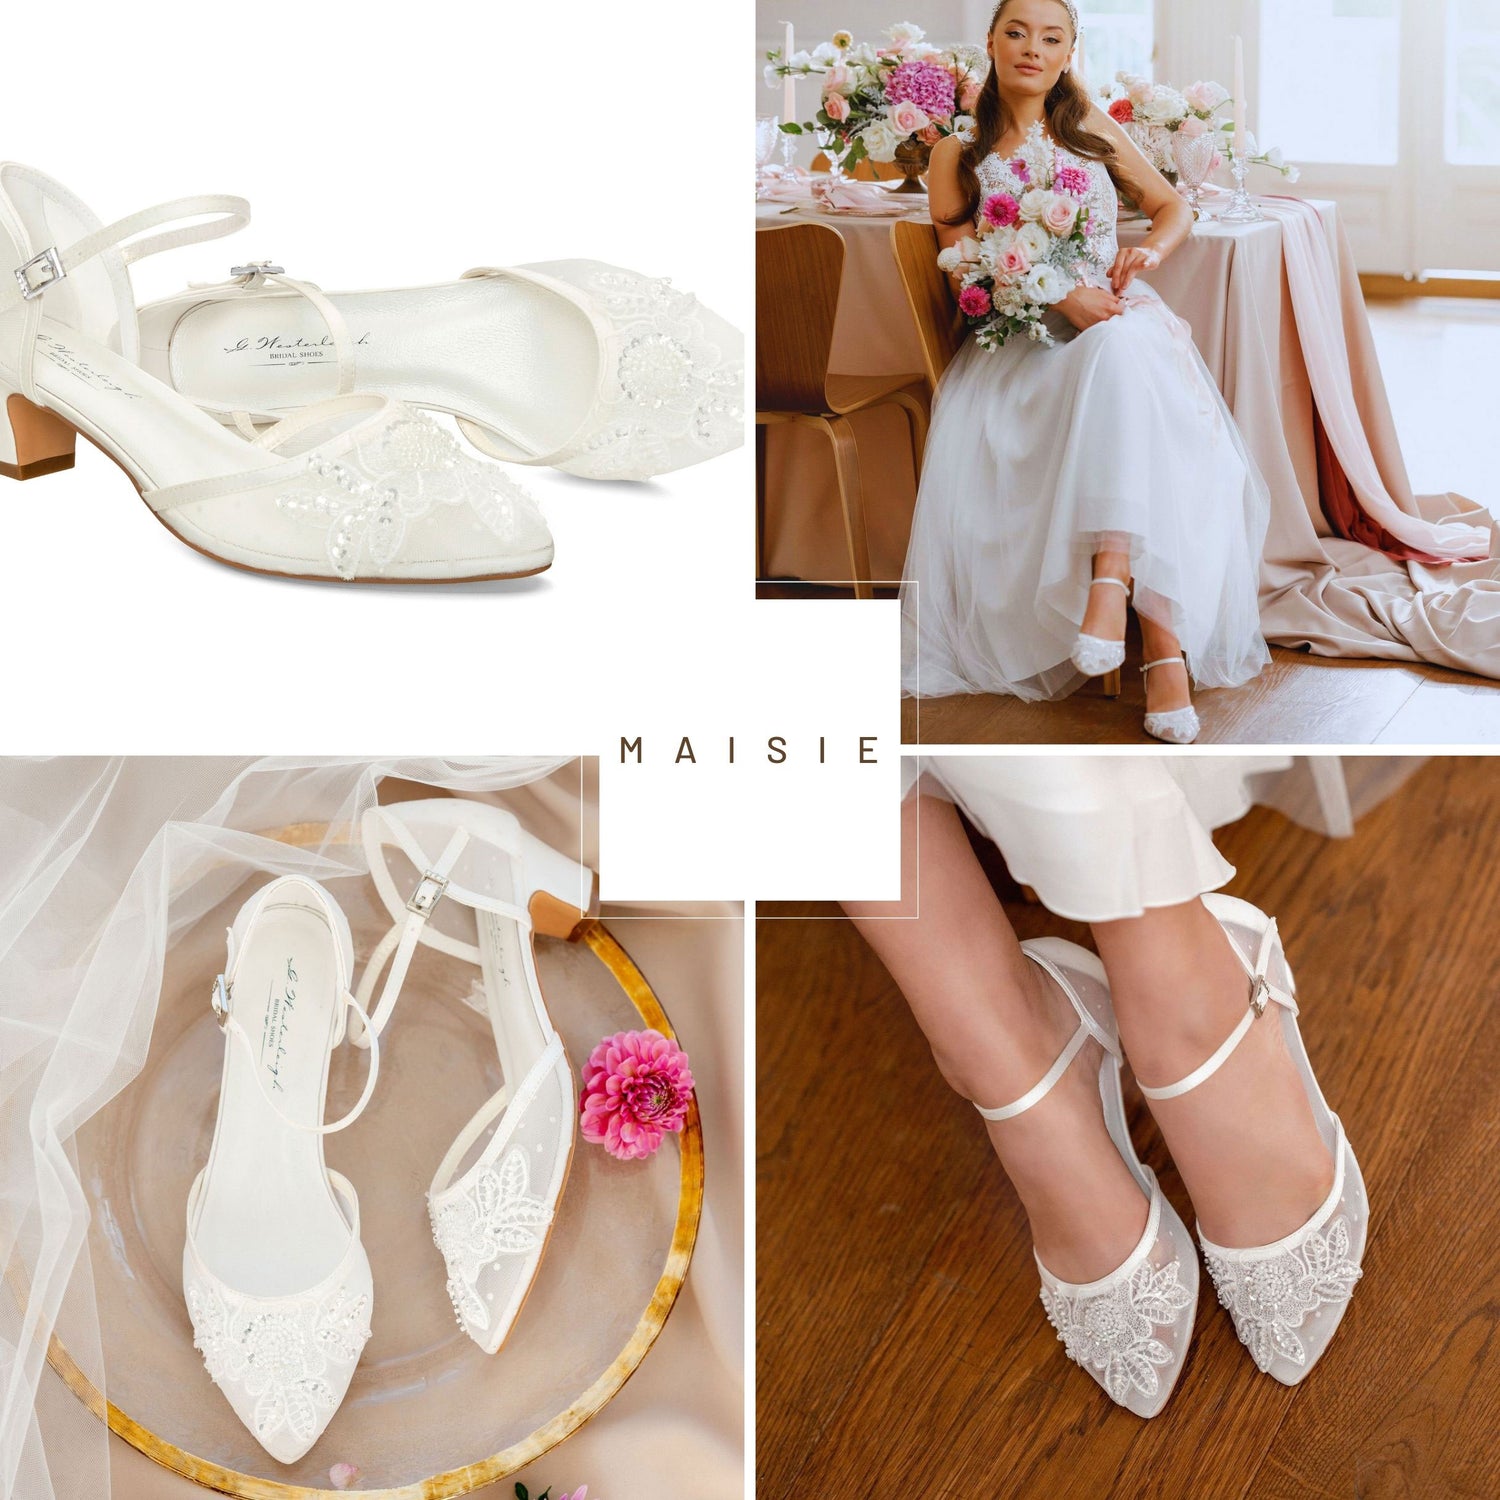 Pearl Embellished Low Heels D'orsay Pumps Shoes For Wedding | Up2Step